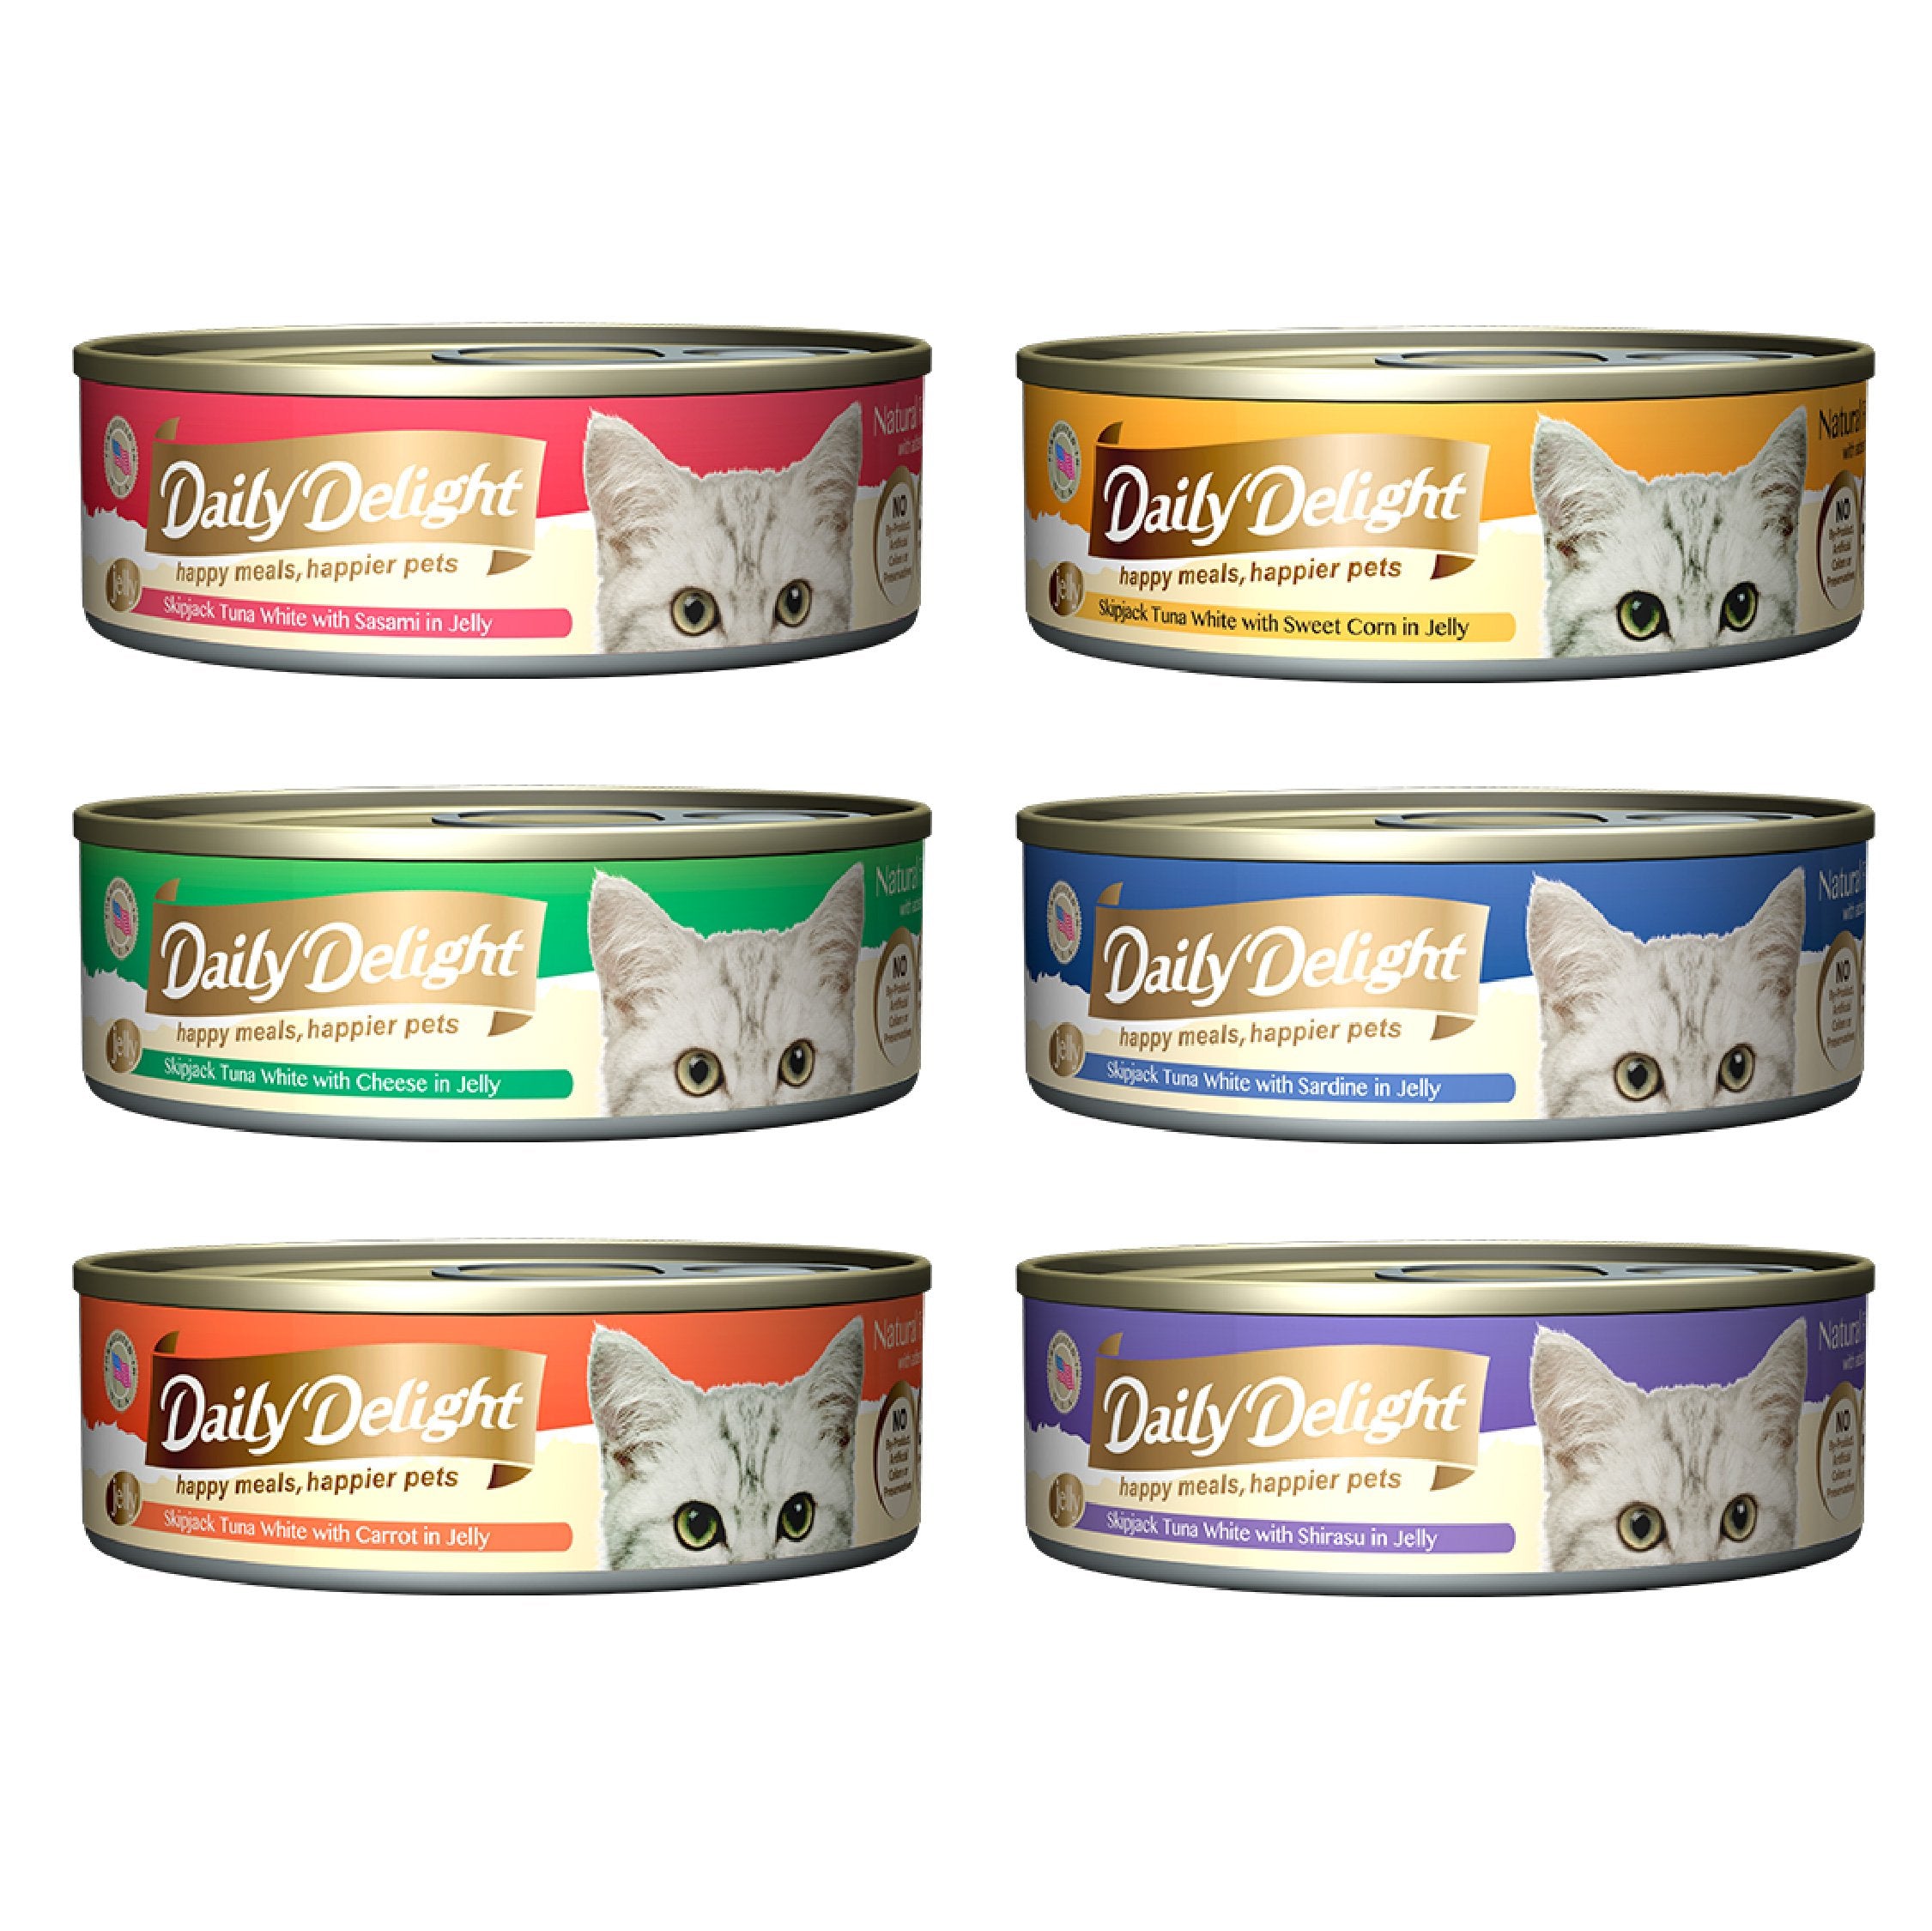 Daily Delight Canned Wet Food For Cats 80g (Jelly Range) - 6 Flavours